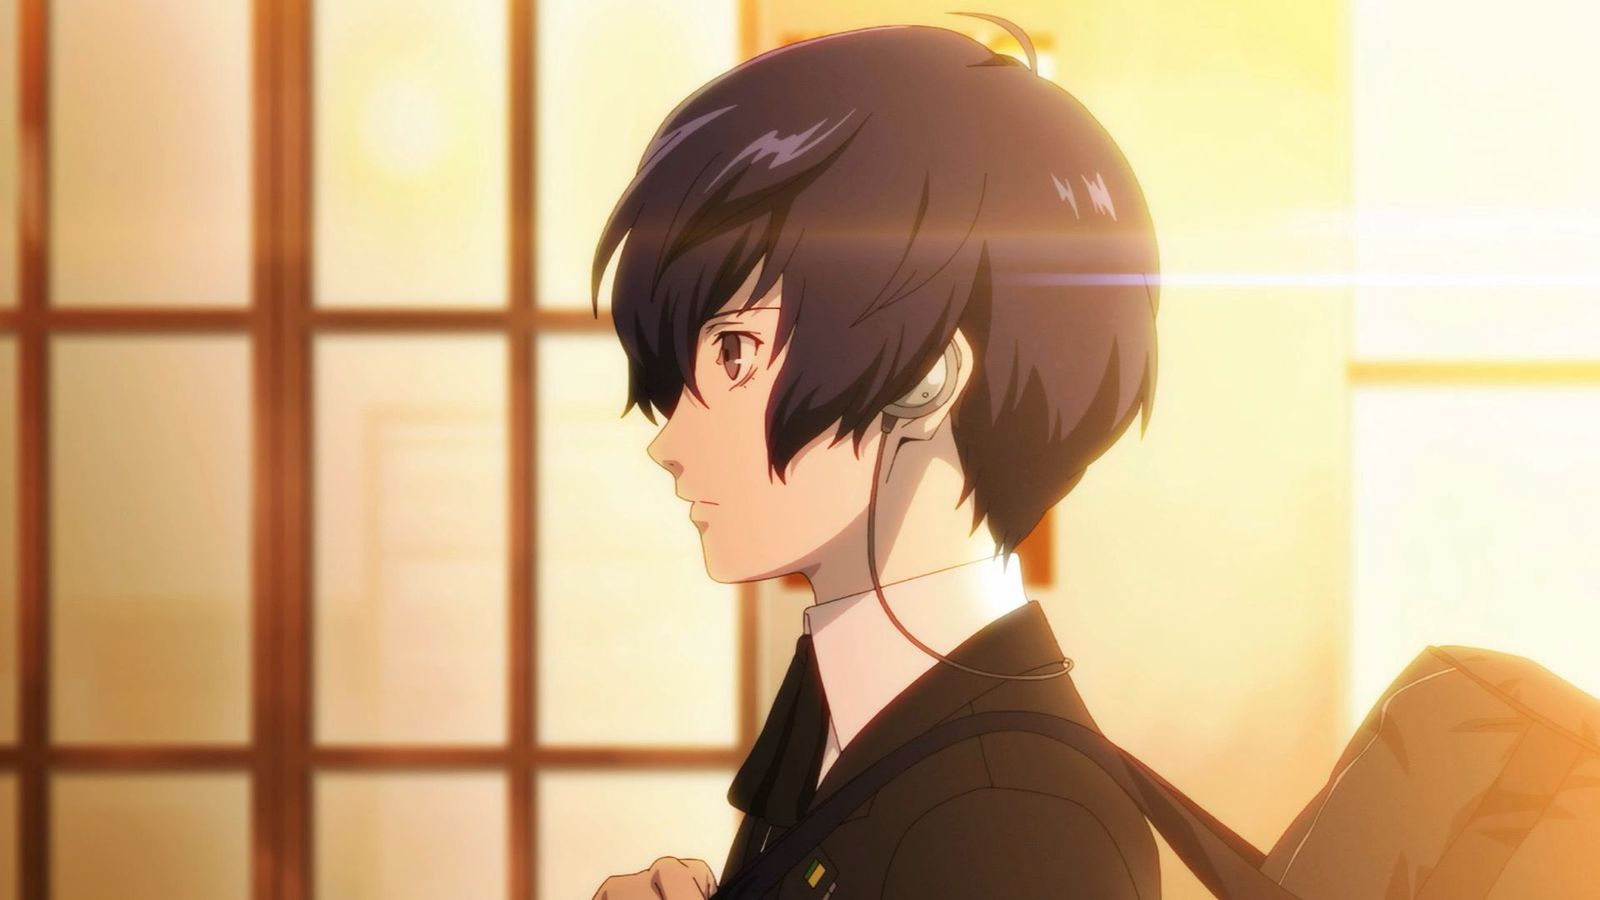 A side-view of the Persona 3 Reload main protagonist